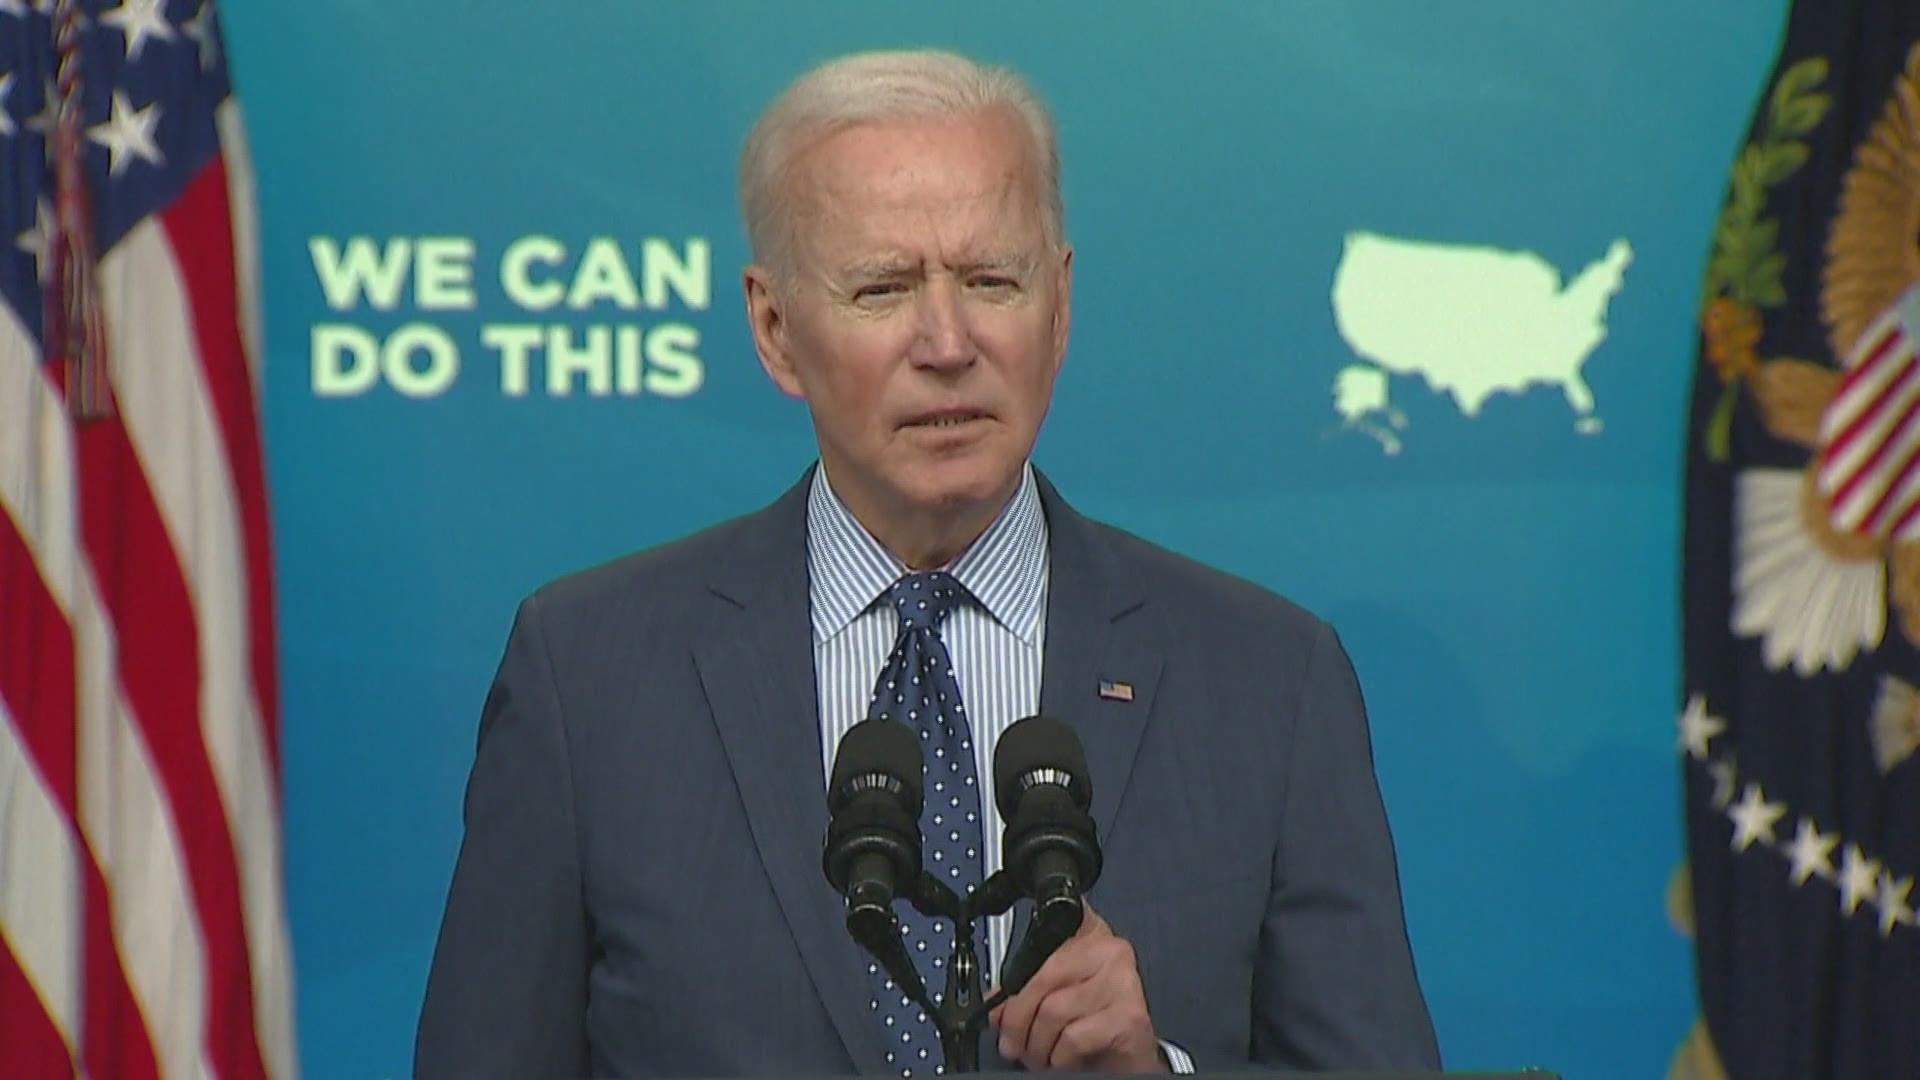 Biden updated the nation on his plans to get 70% of adults at least partially vaccinated by Independence Day.